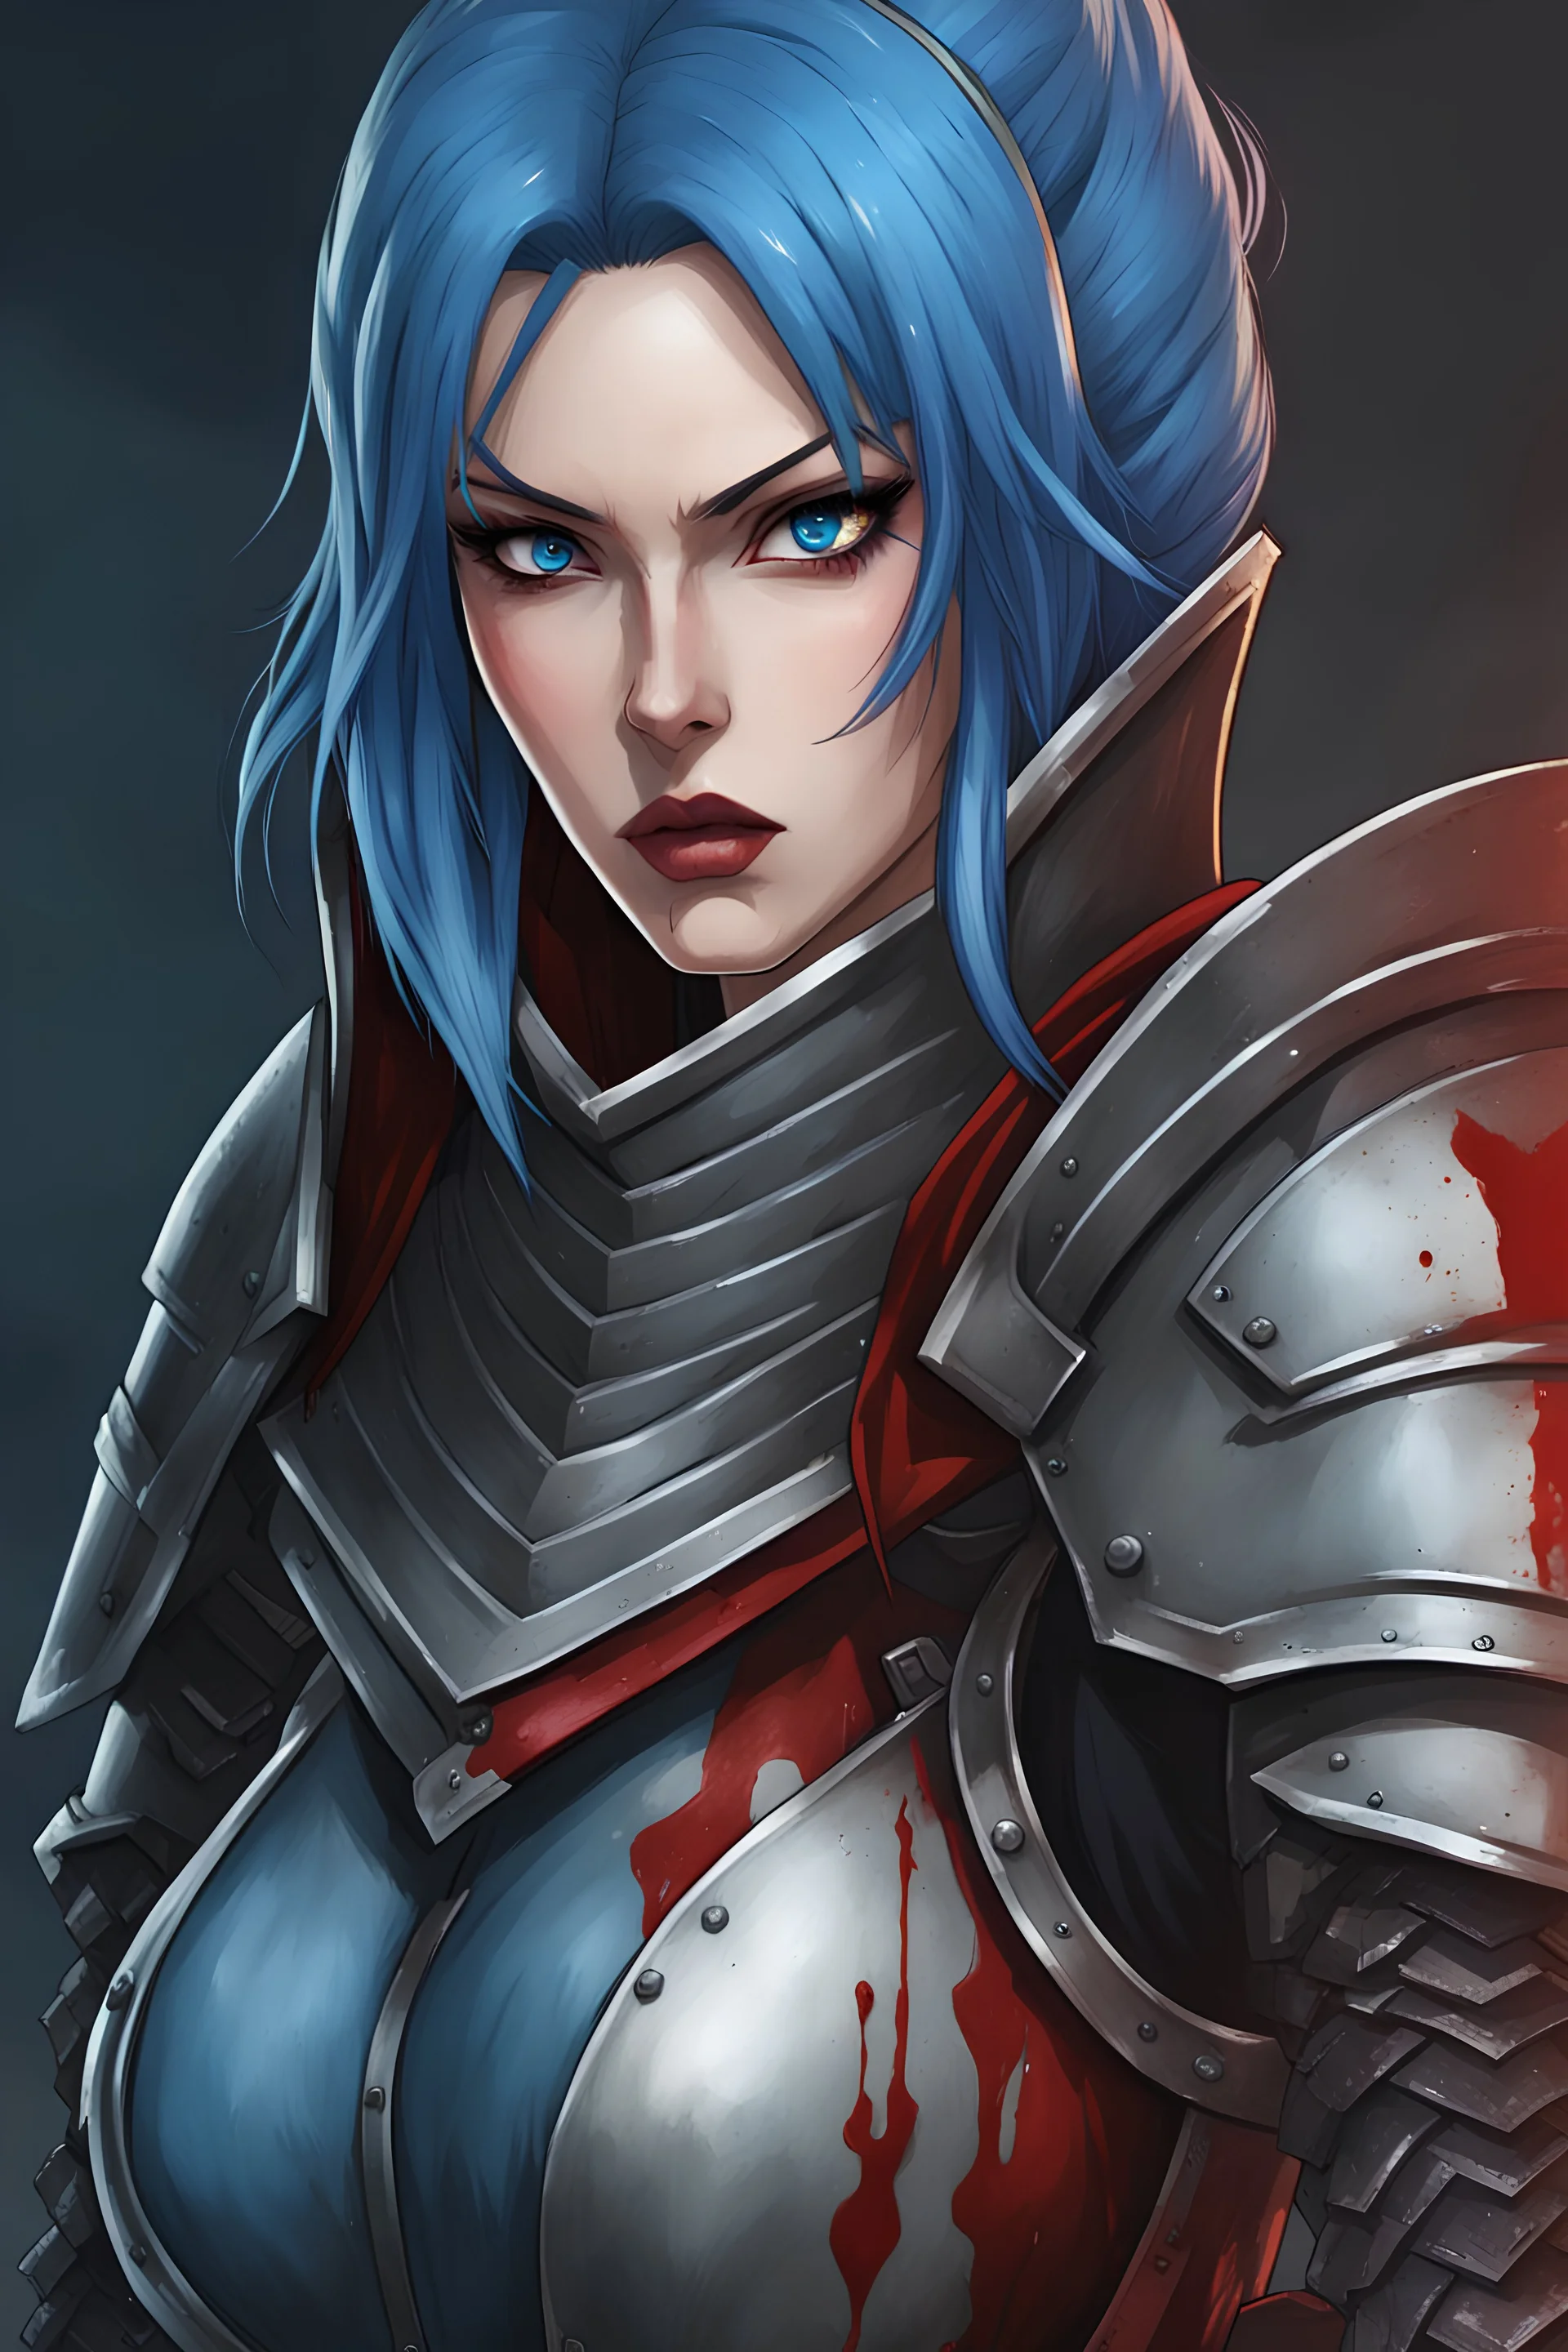 a beautiful woman wearing medieval armor, looking at the camera, angry, blue eyes, blue hair, gray and red armor, anime artstyle, close up on face, blood on his face, longe hair, furious expression, kazuma kaneko painting style, prison school art style,